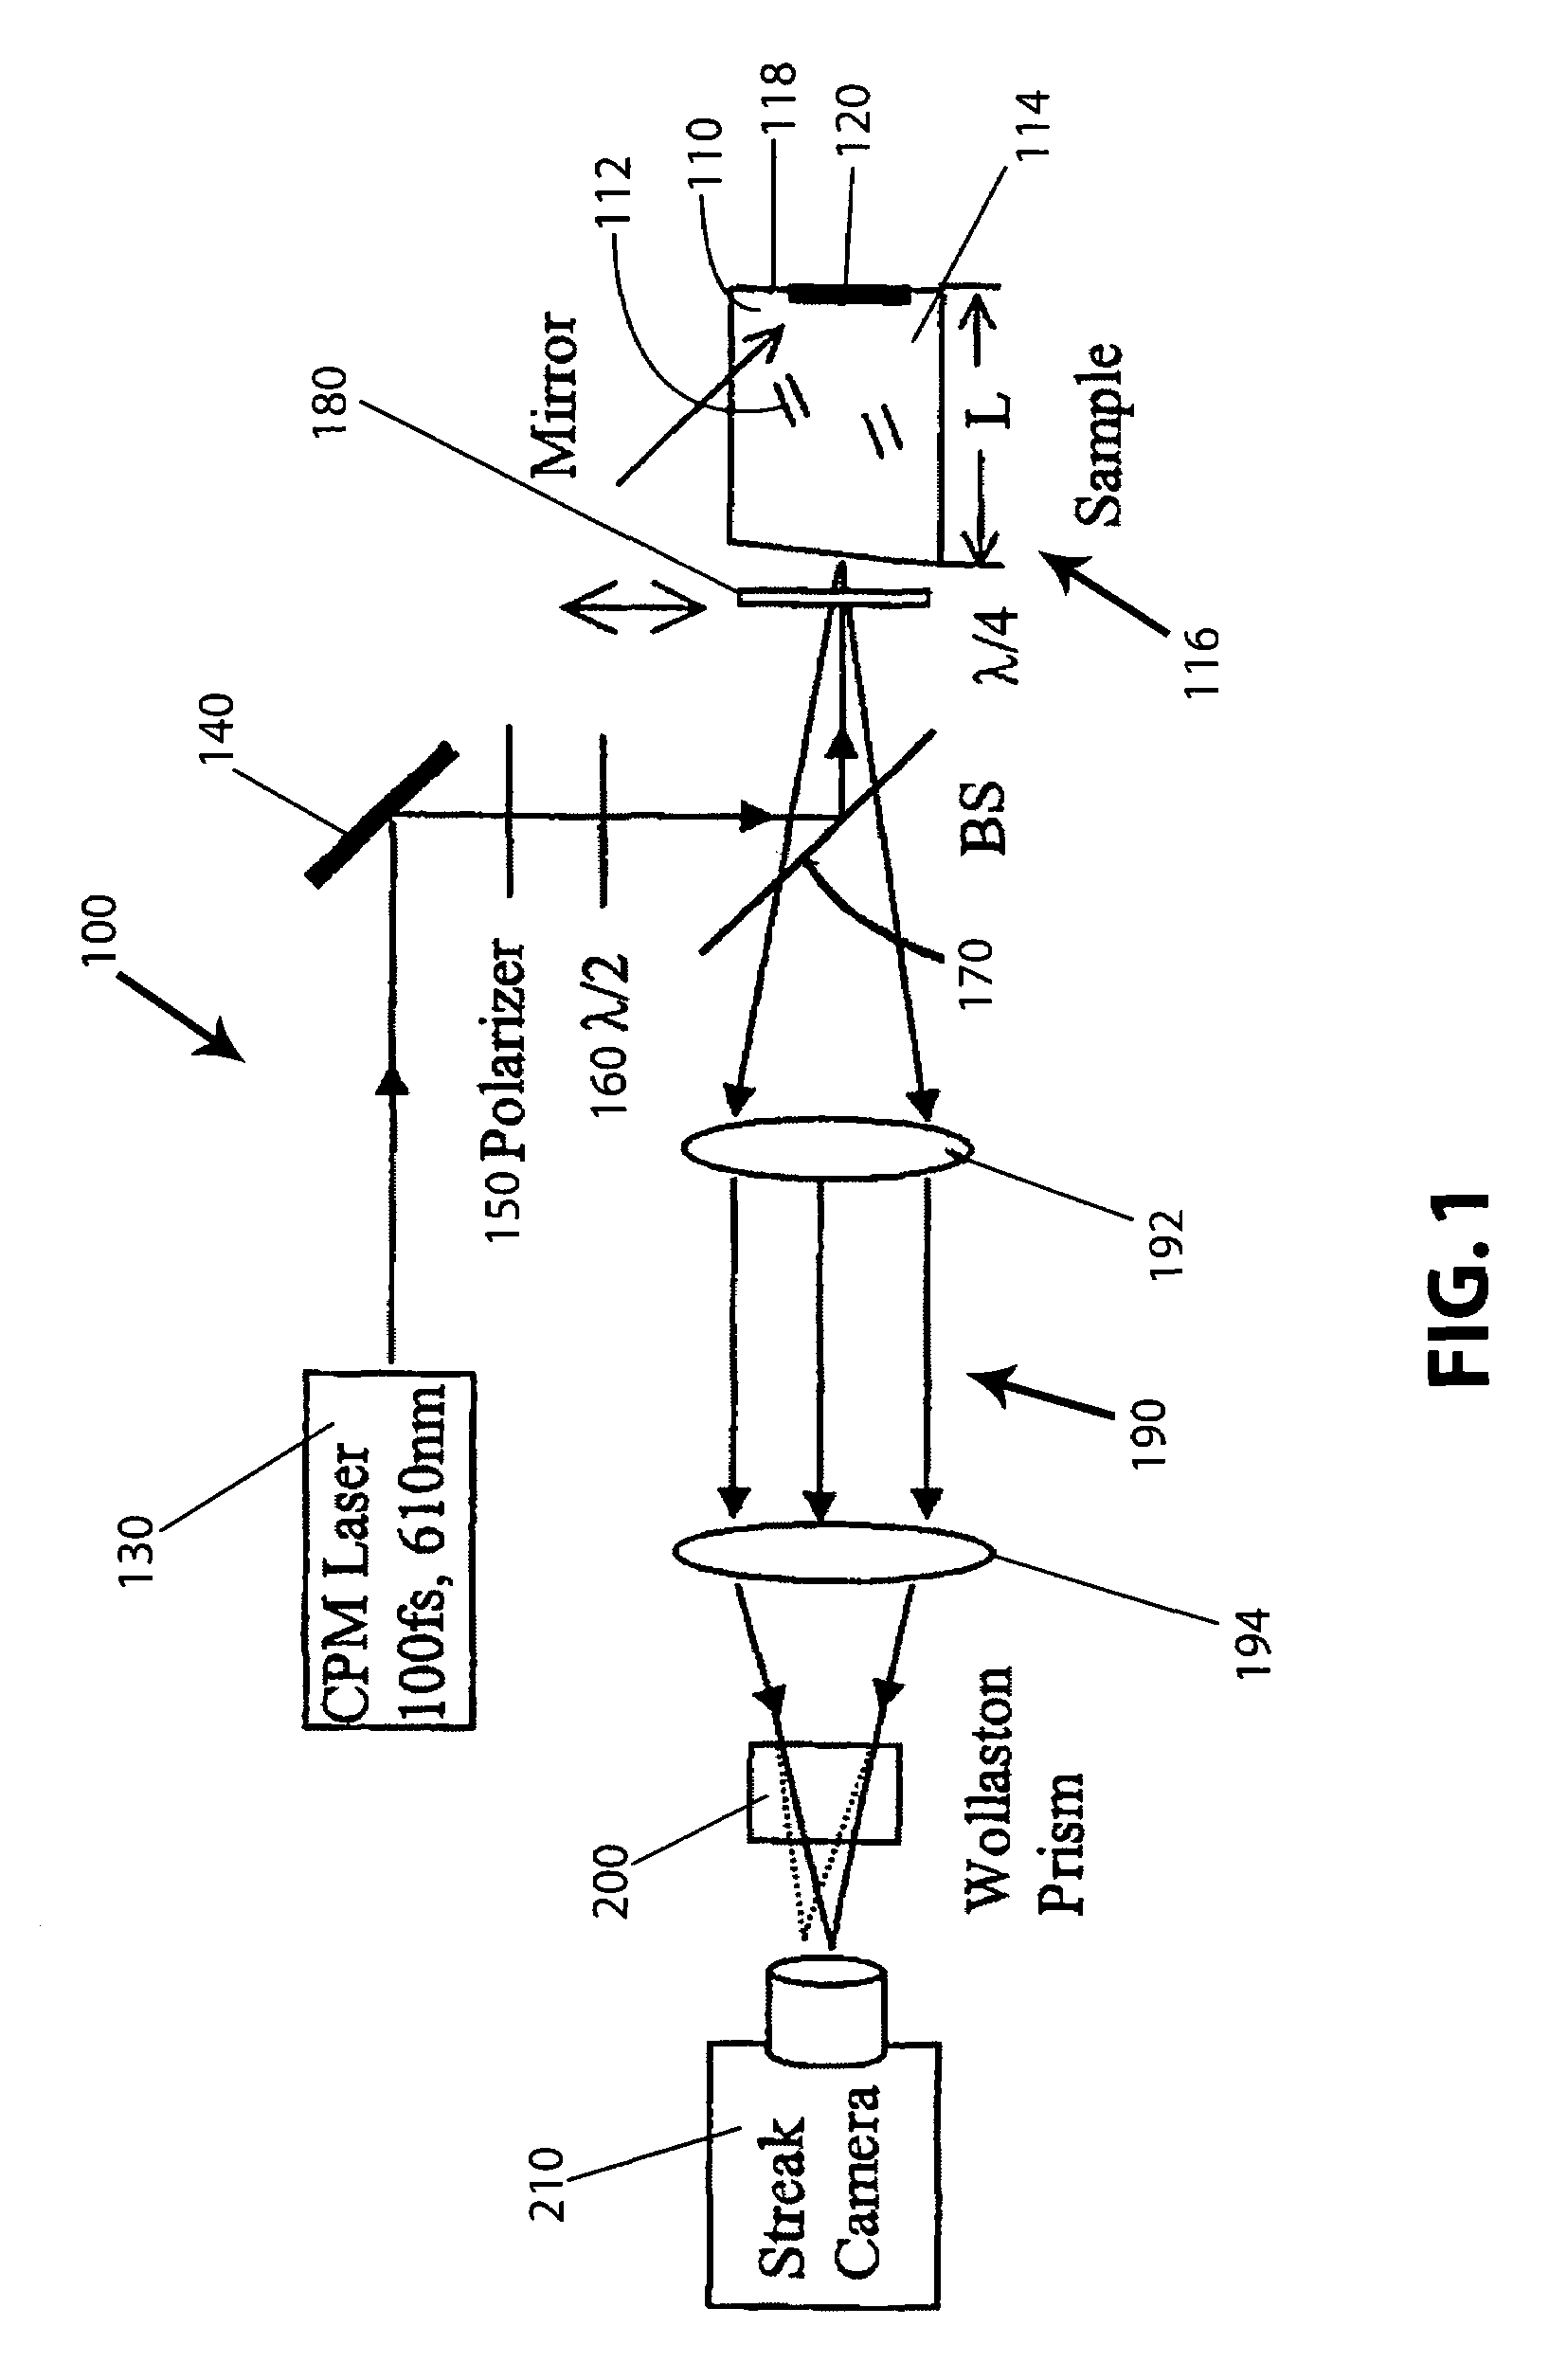 Imaging systems and methods to improve backscattering imaging using circular polarization memory